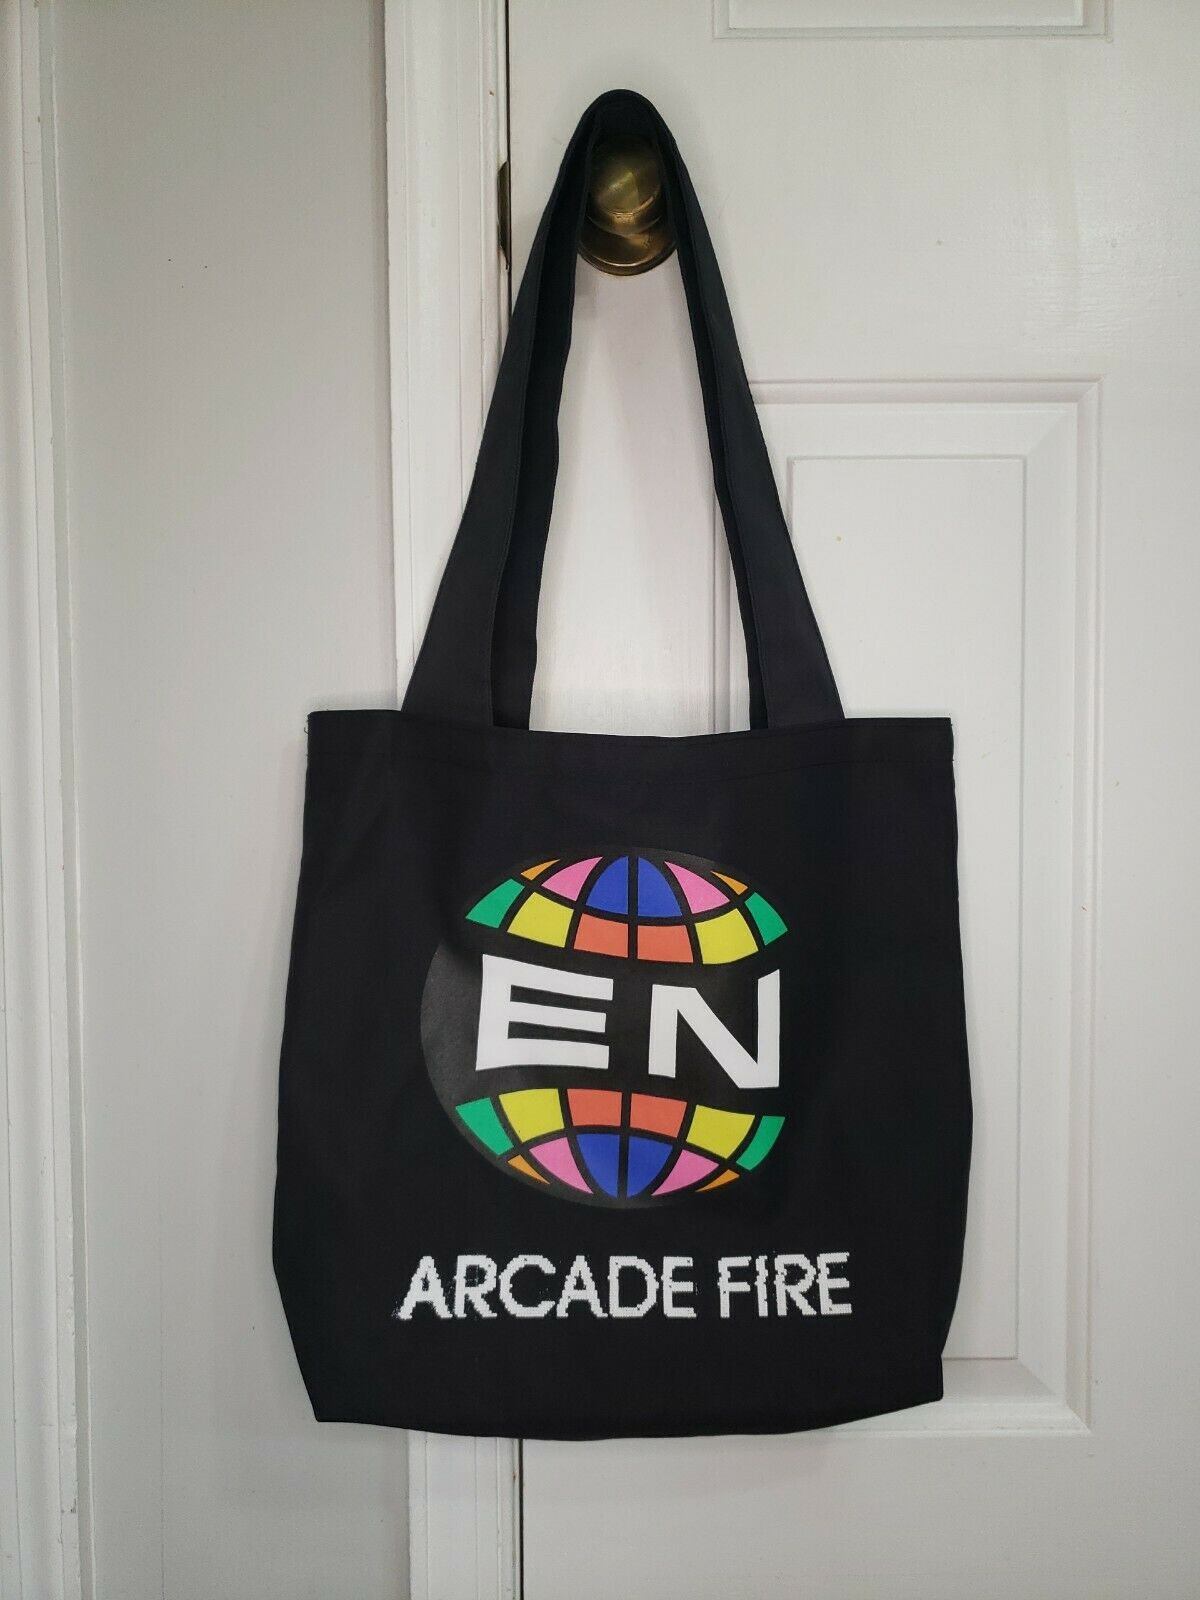 Arcade Fire Tote Bag Black Canvas Everything Now Unisex